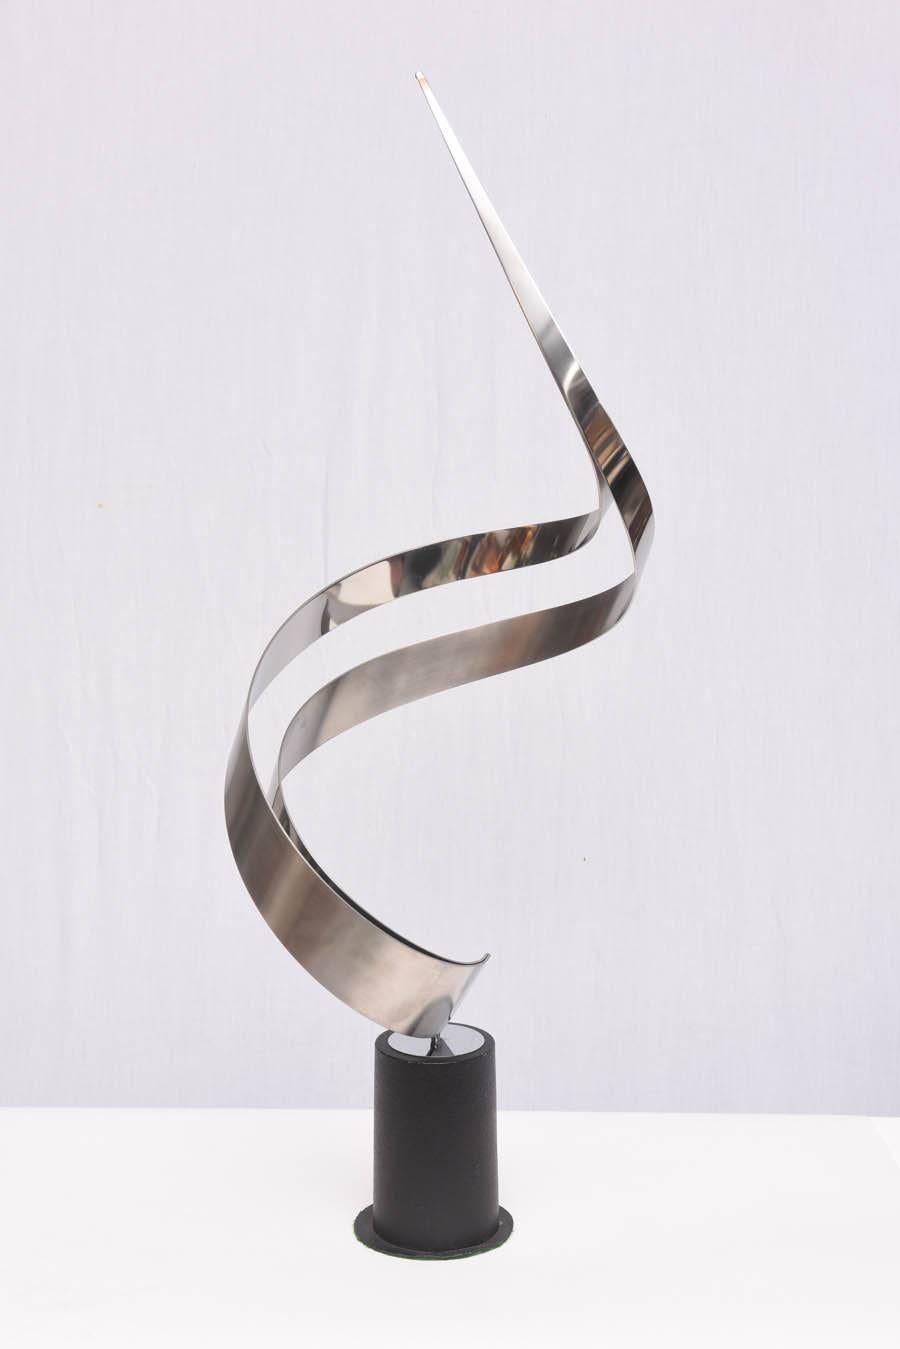 American Curtis Jere Swivel Swirl Sculpture in Chrome, 1970s, USA For Sale